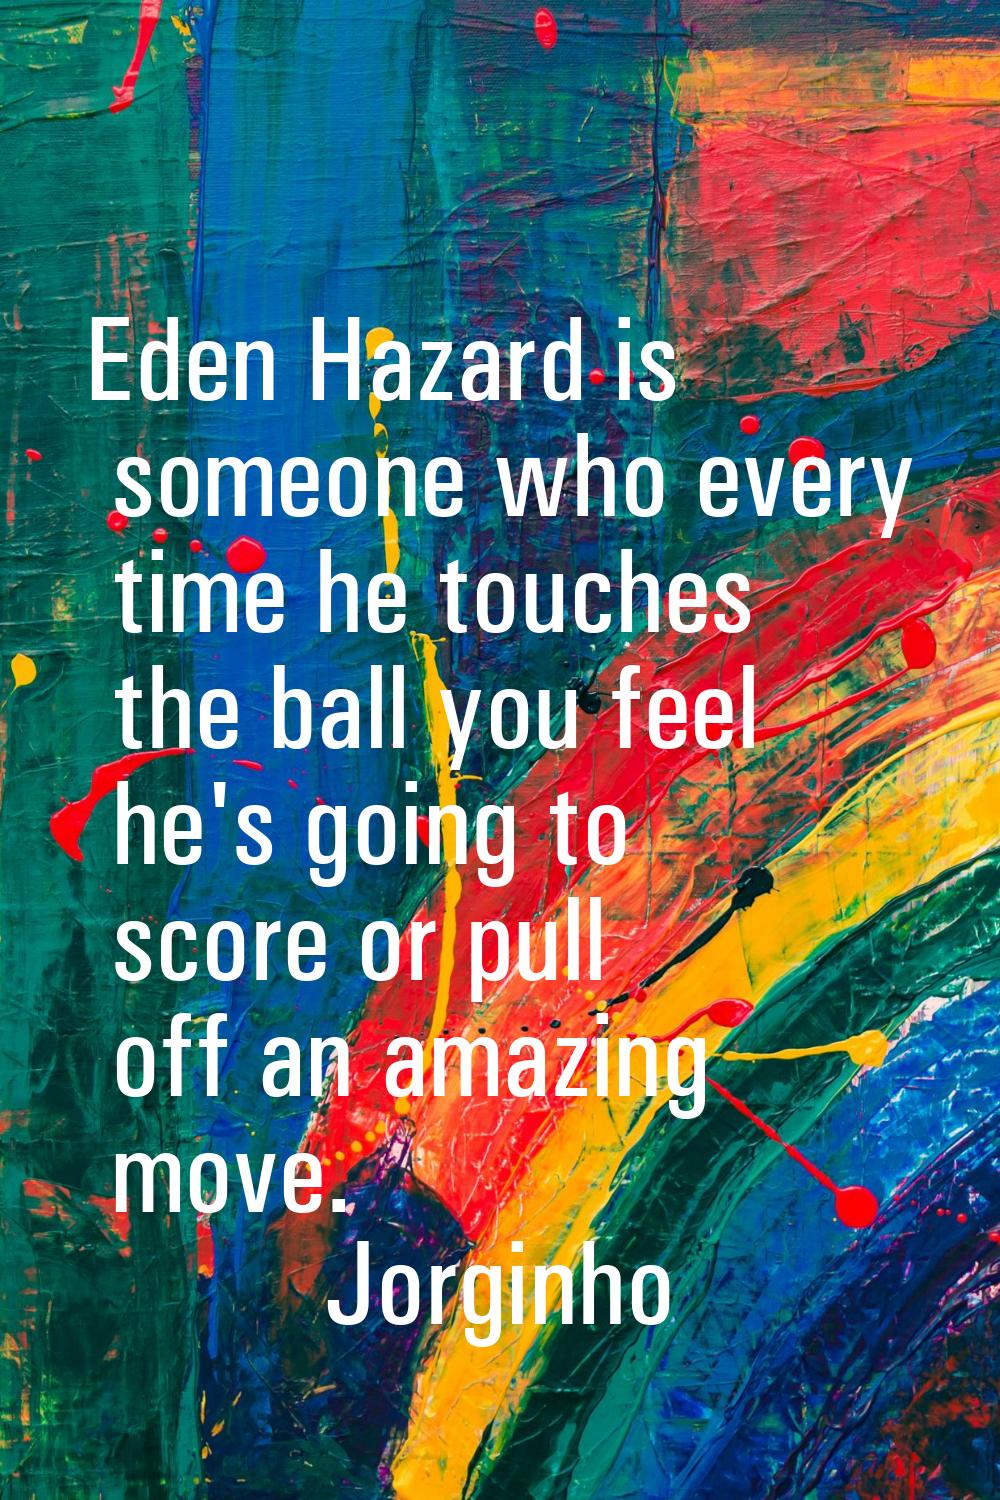 Eden Hazard is someone who every time he touches the ball you feel he's going to score or pull off 